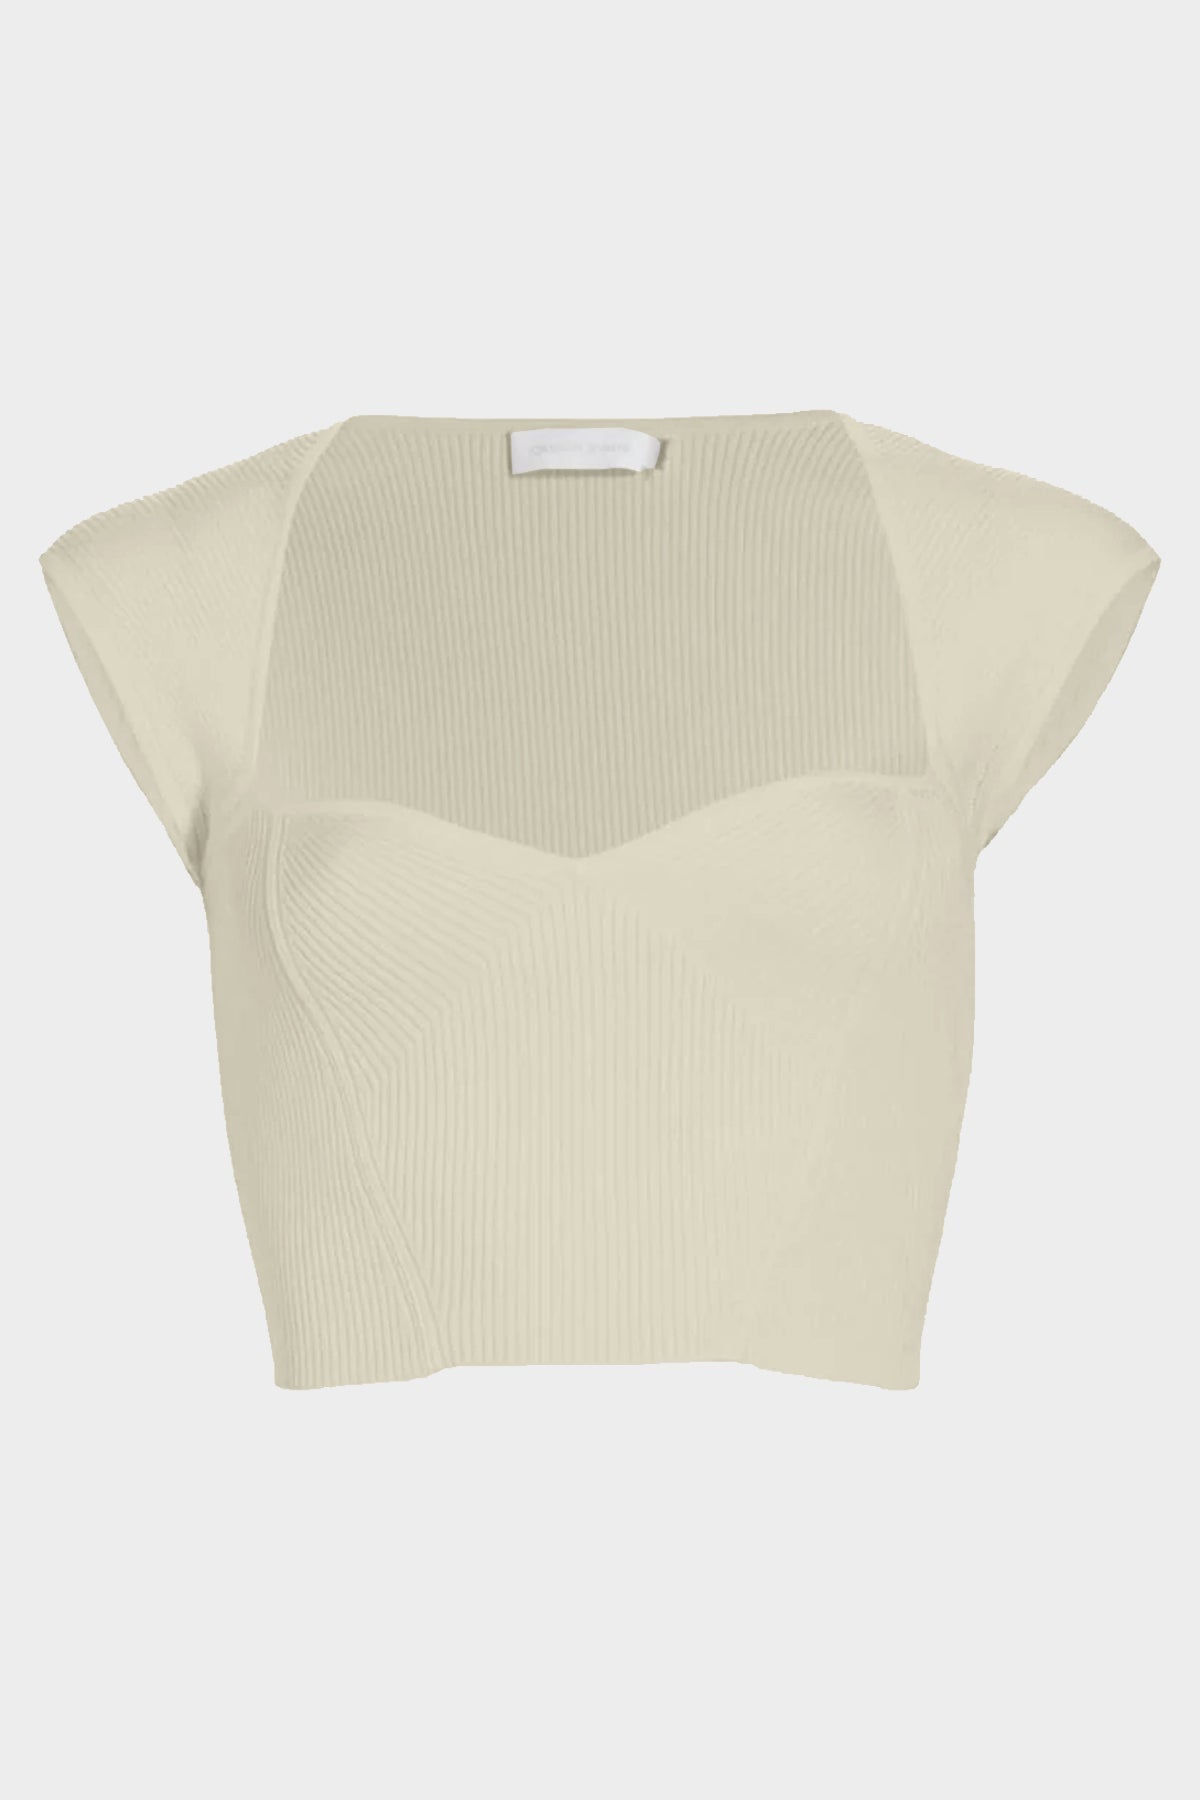 Abia Cropped Top in Almond - shop-olivia.com